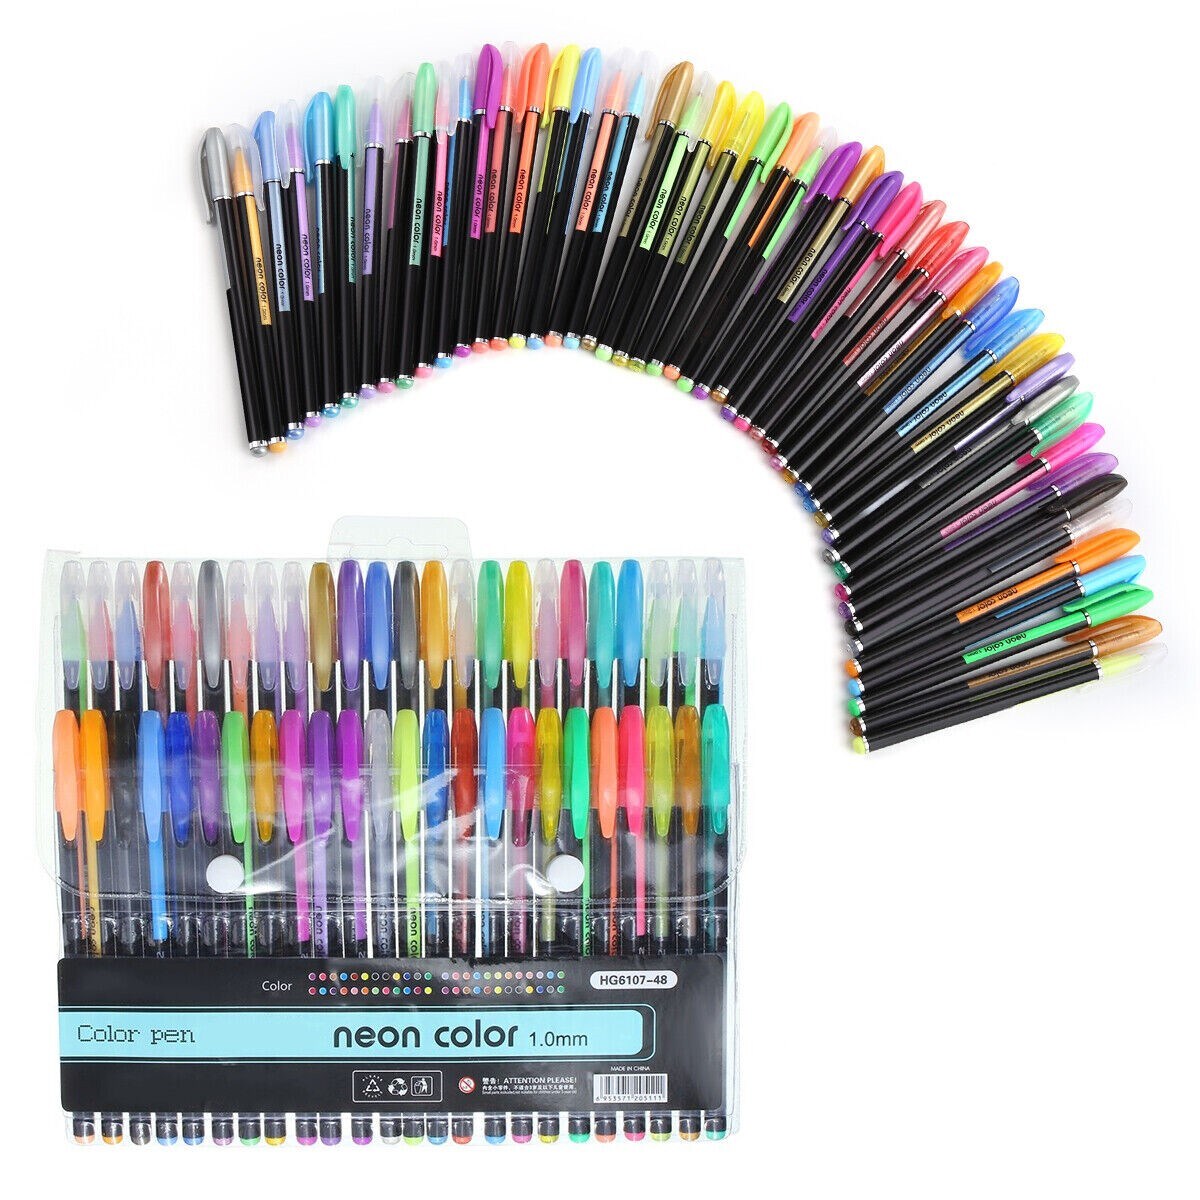 Adult Coloring Books Colored Pen with 40% More Ink for Drawing